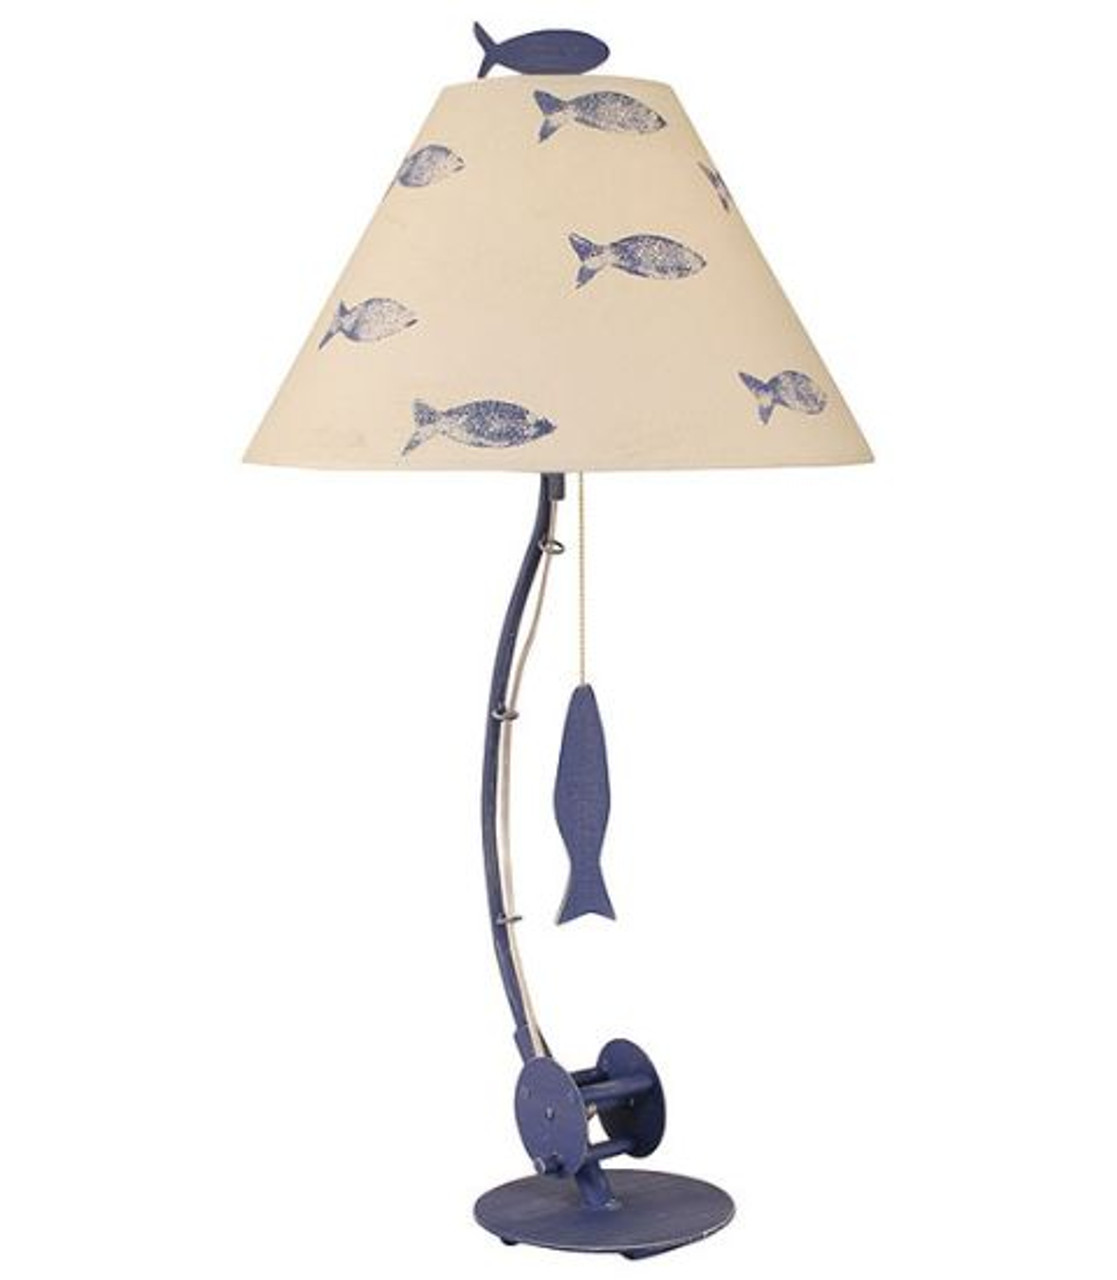 https://cdn11.bigcommerce.com/s-262q5dgaa3/images/stencil/1280x1280/products/9408/18471/sea-fishing-pole-table-lamp-in-blue-2__30279.1662121255.jpg?c=1